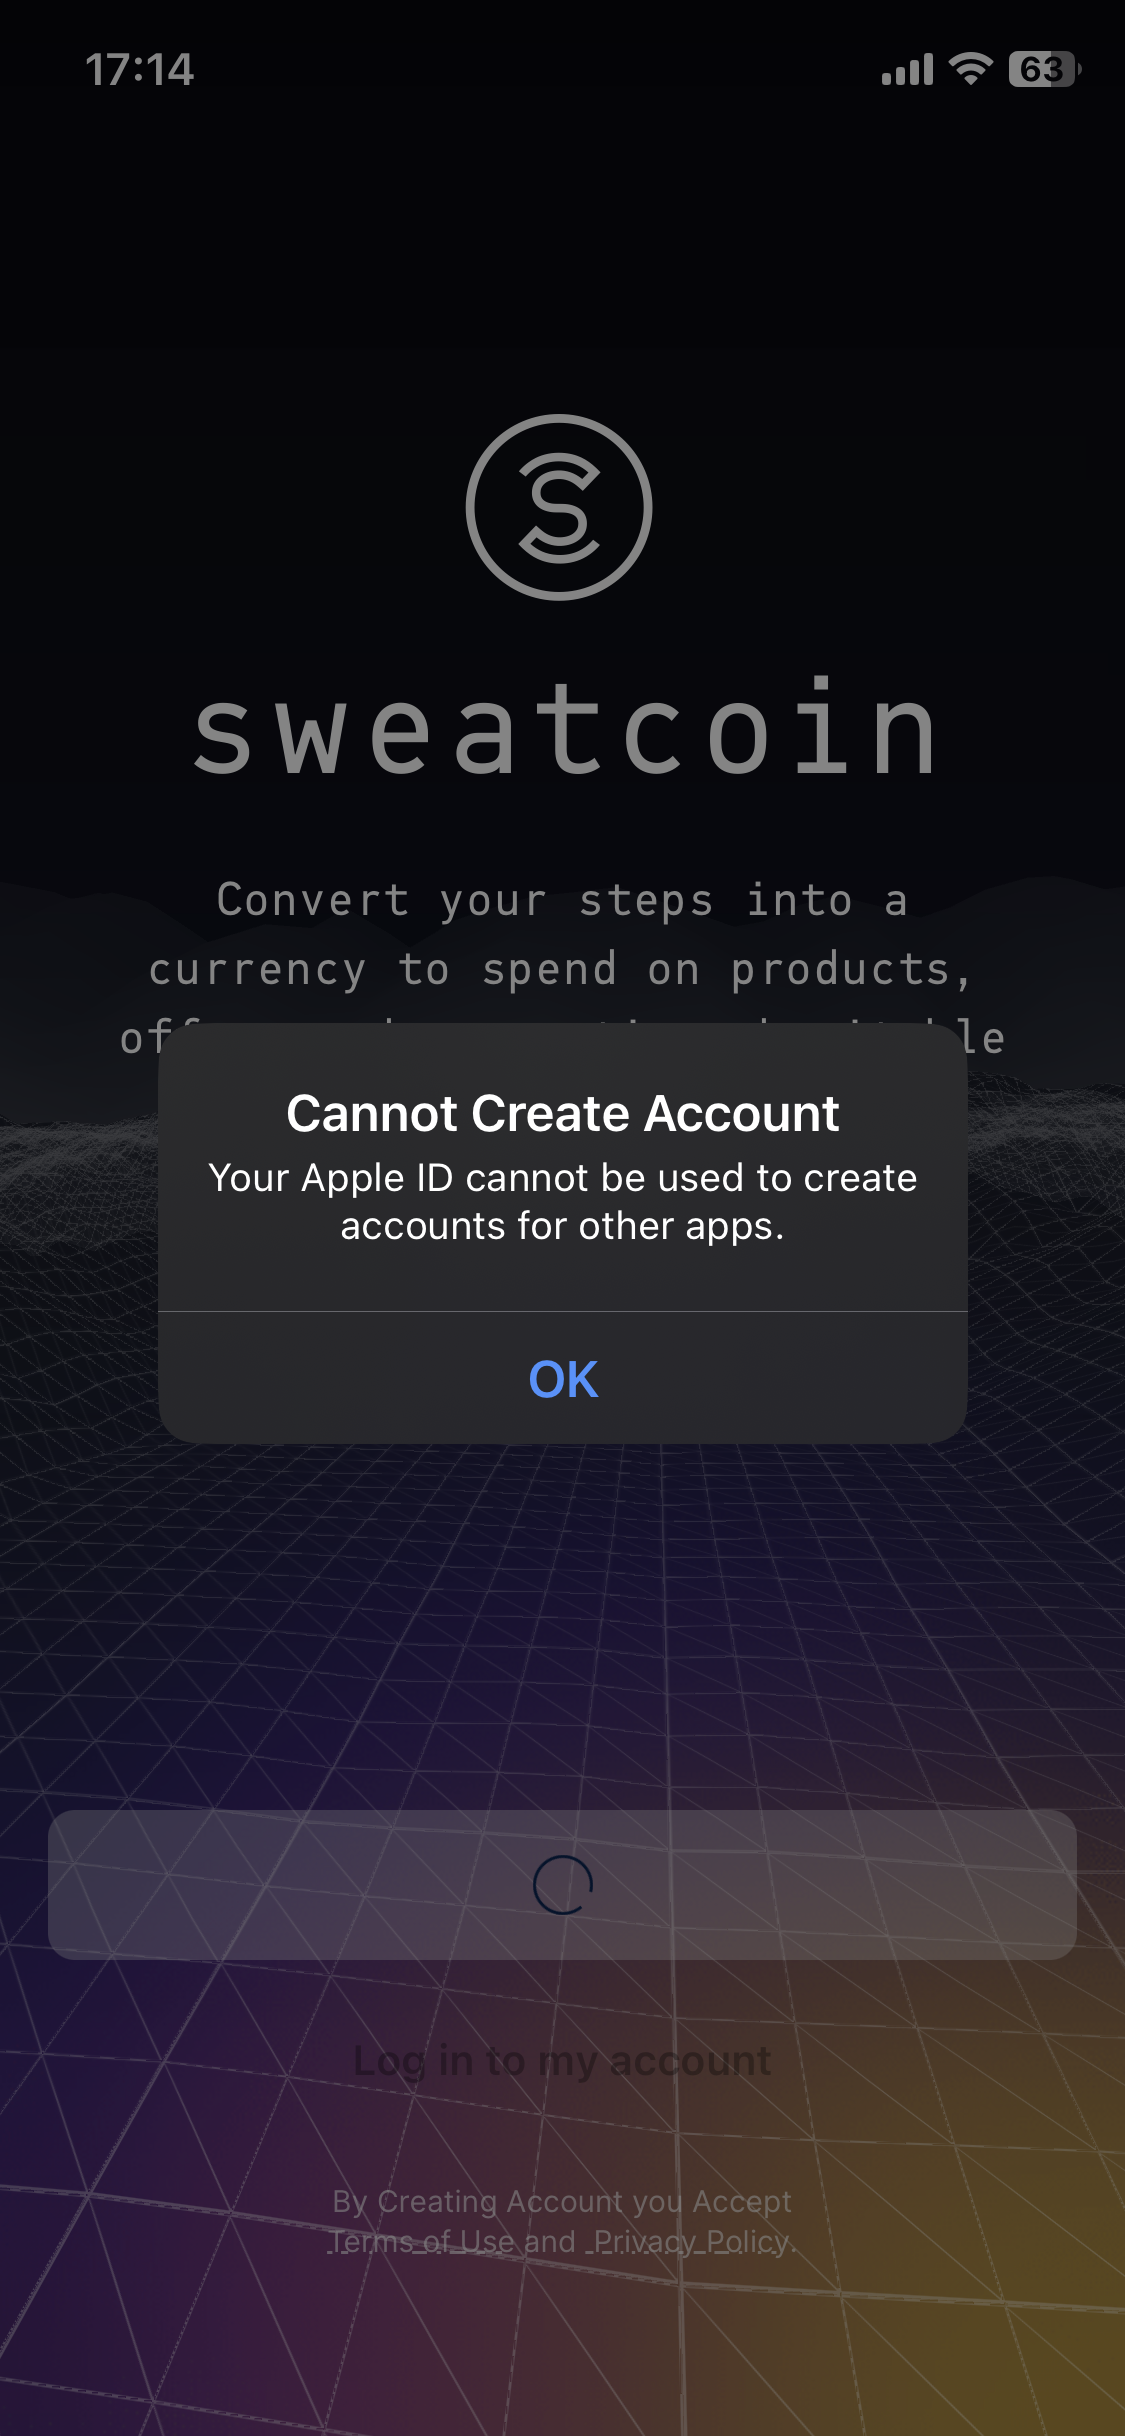 Easy Ways to Buy Stuff on Sweatcoin on iPhone or iPad: 6 Steps